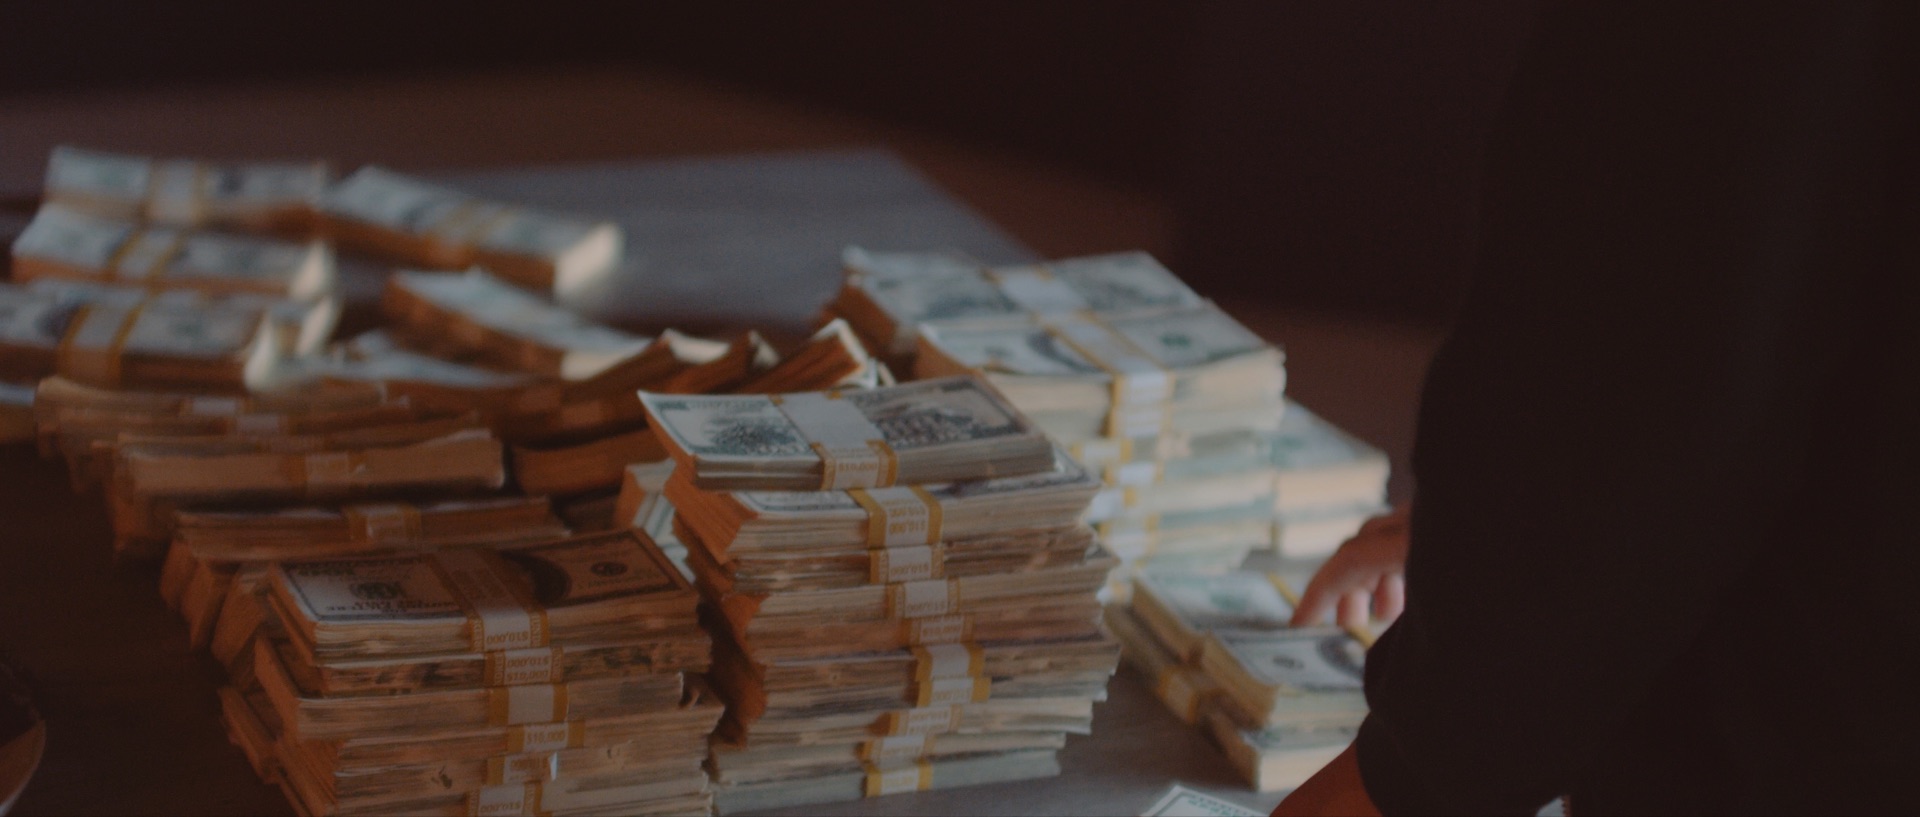 Closeup of stacks of paper money on a table